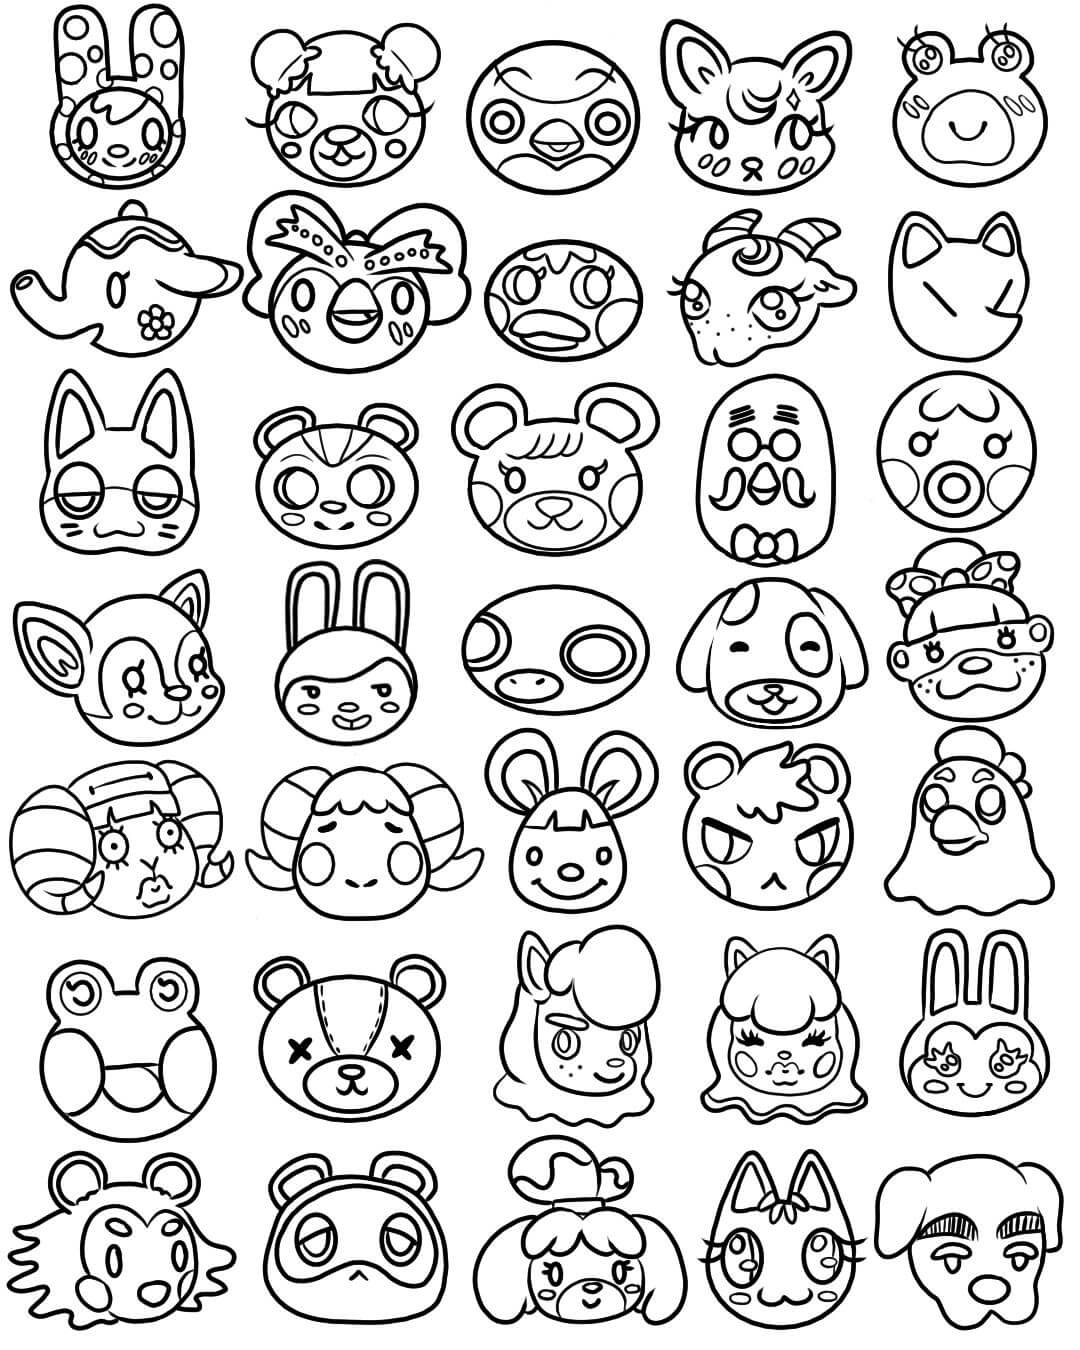 Animal Crossing Kawaii Cute Head Coloring Pages   Coloring Cool